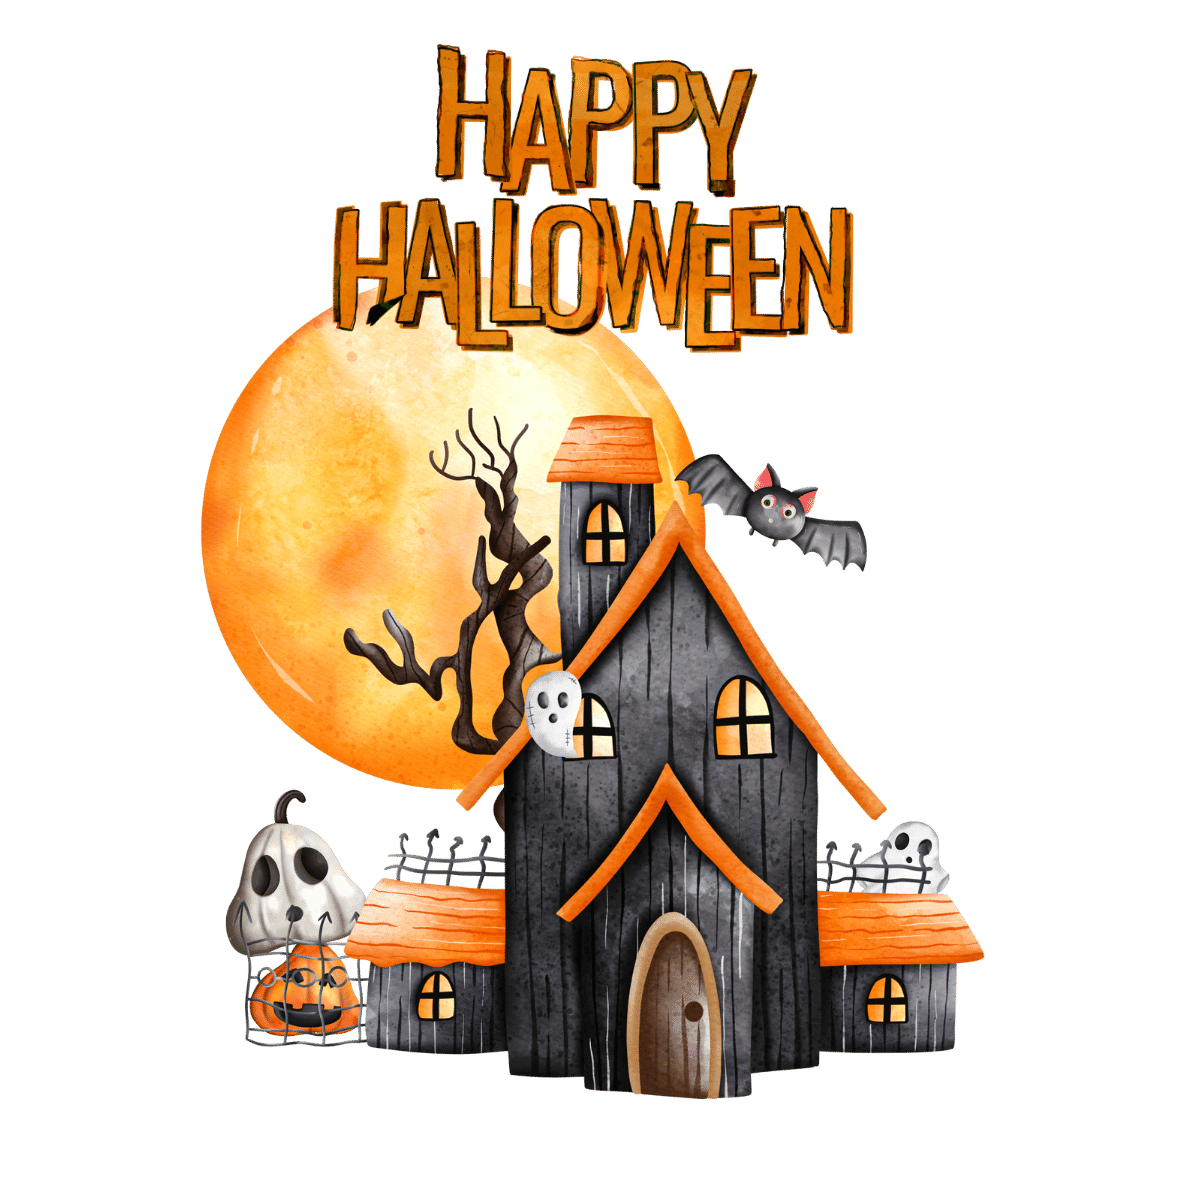 5 Stickers Halloween Bundle cover image.